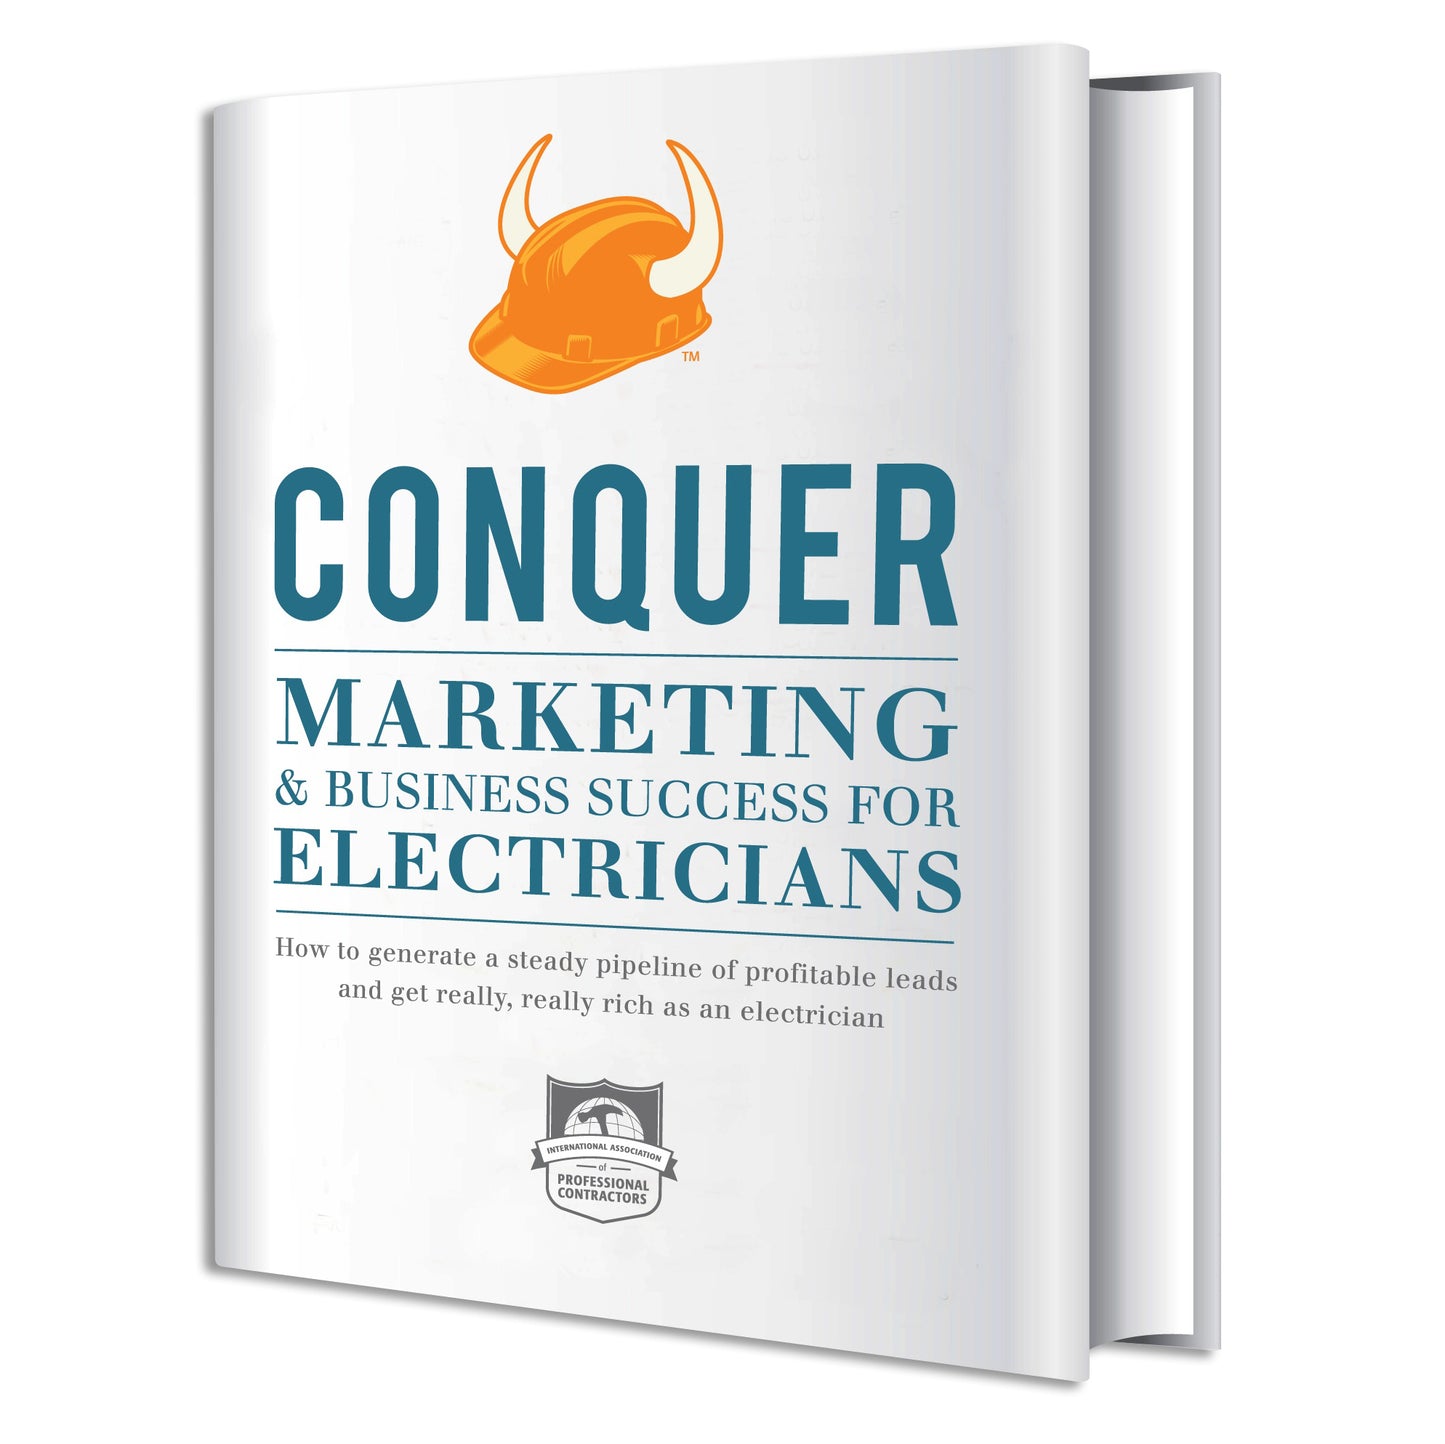 CONQUER Marketing and Business Success for Electricians PDF